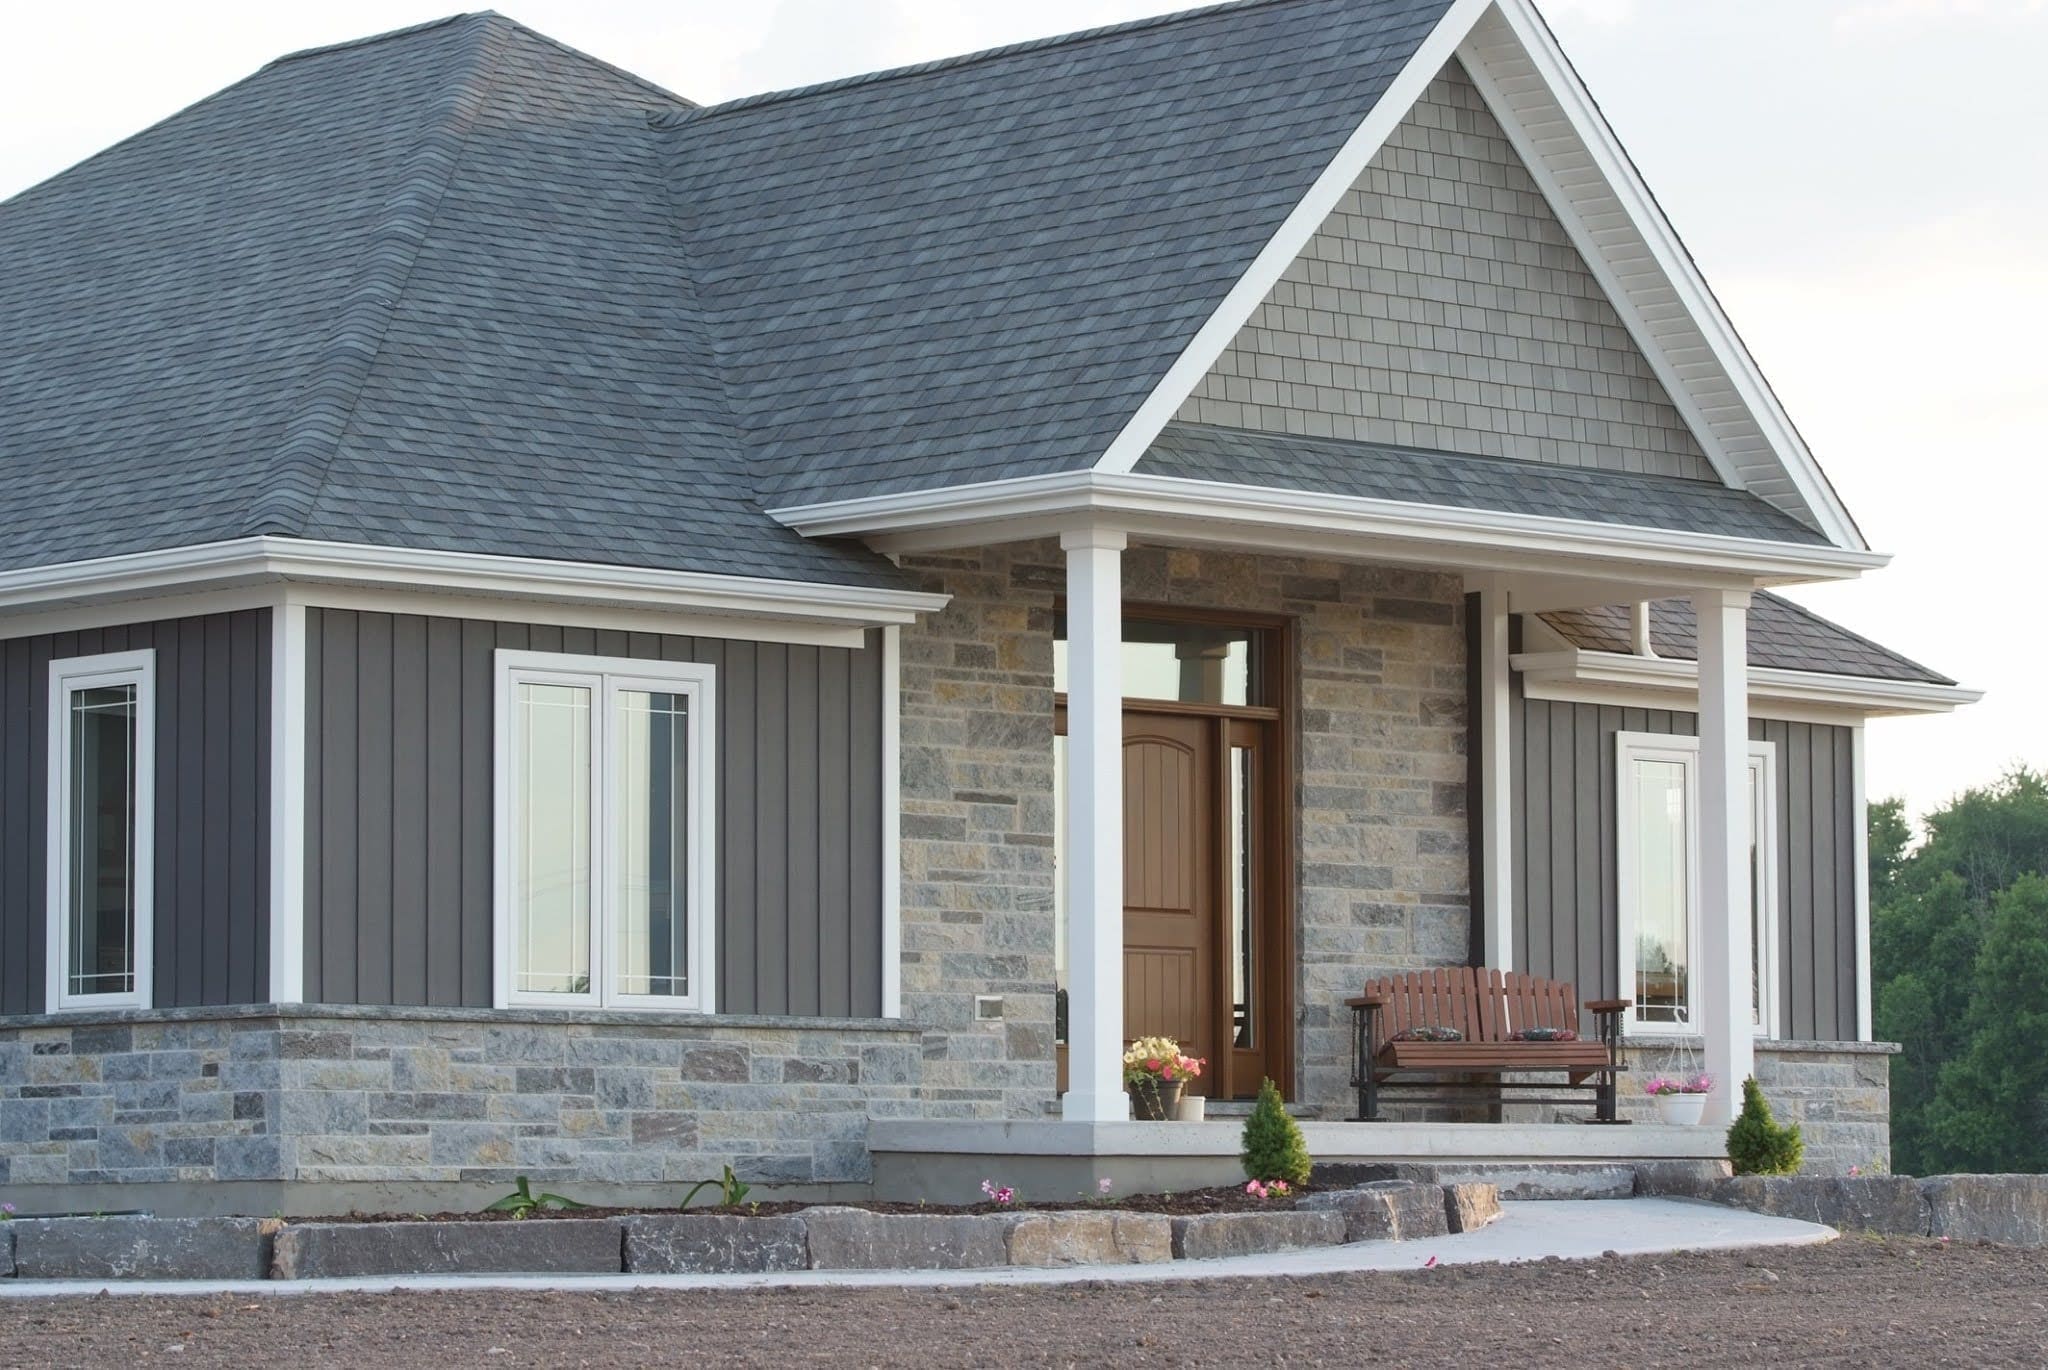 Jacksonport and Pembroke Real Stone Veneer Blend with White Mortar Exterior